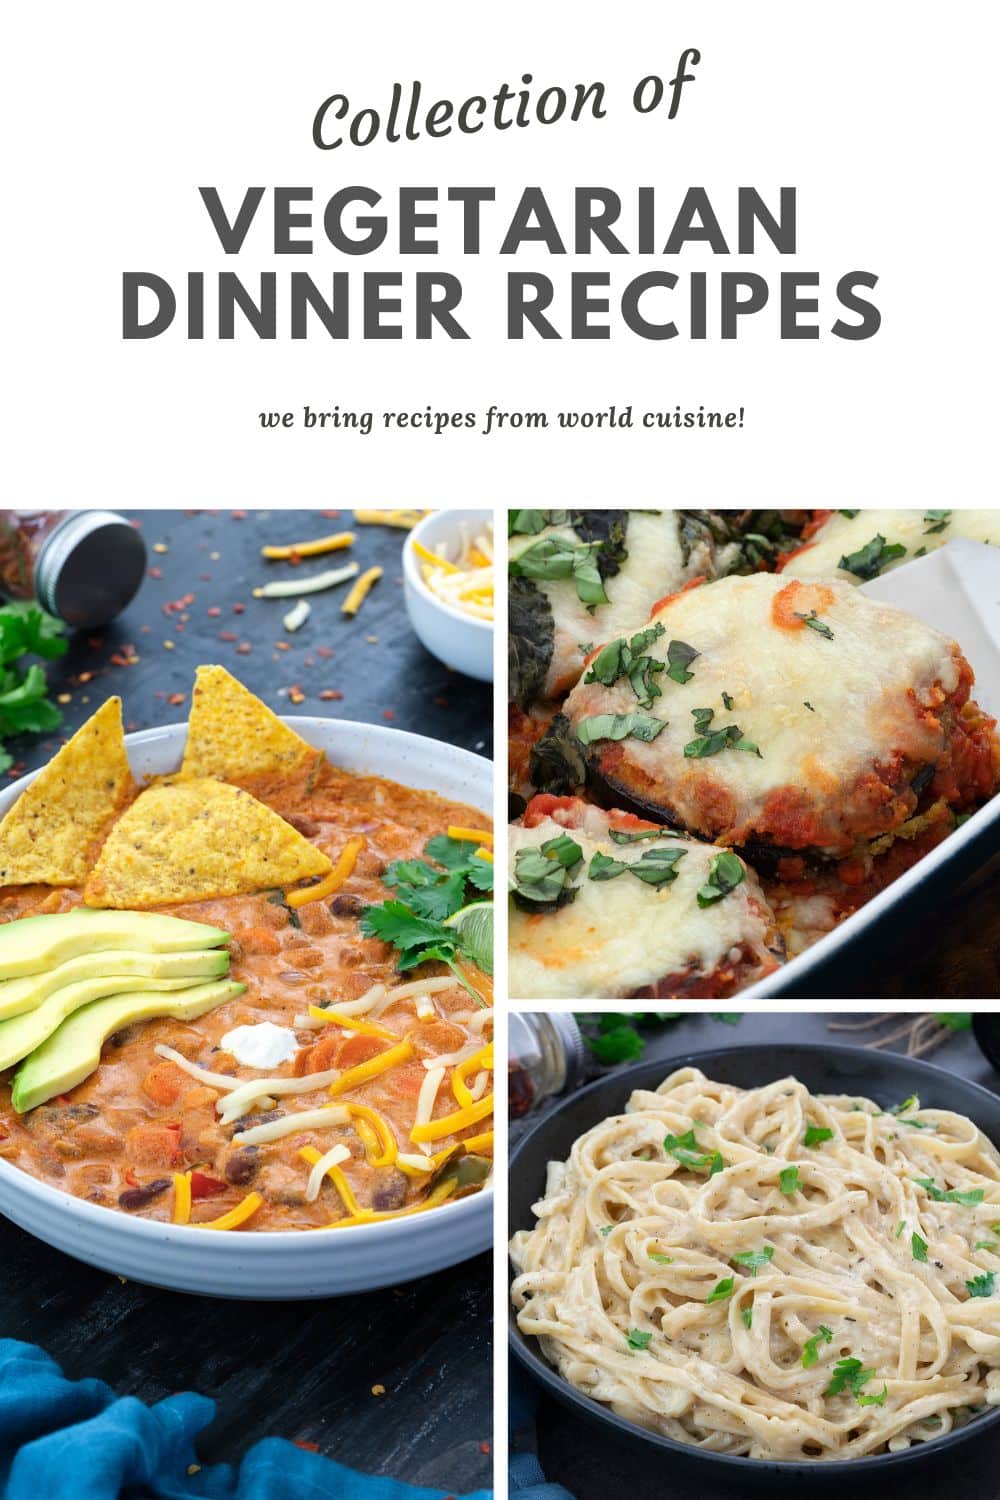 A collection of healthy vegetarian dinner recipes depicted in a collage of images.